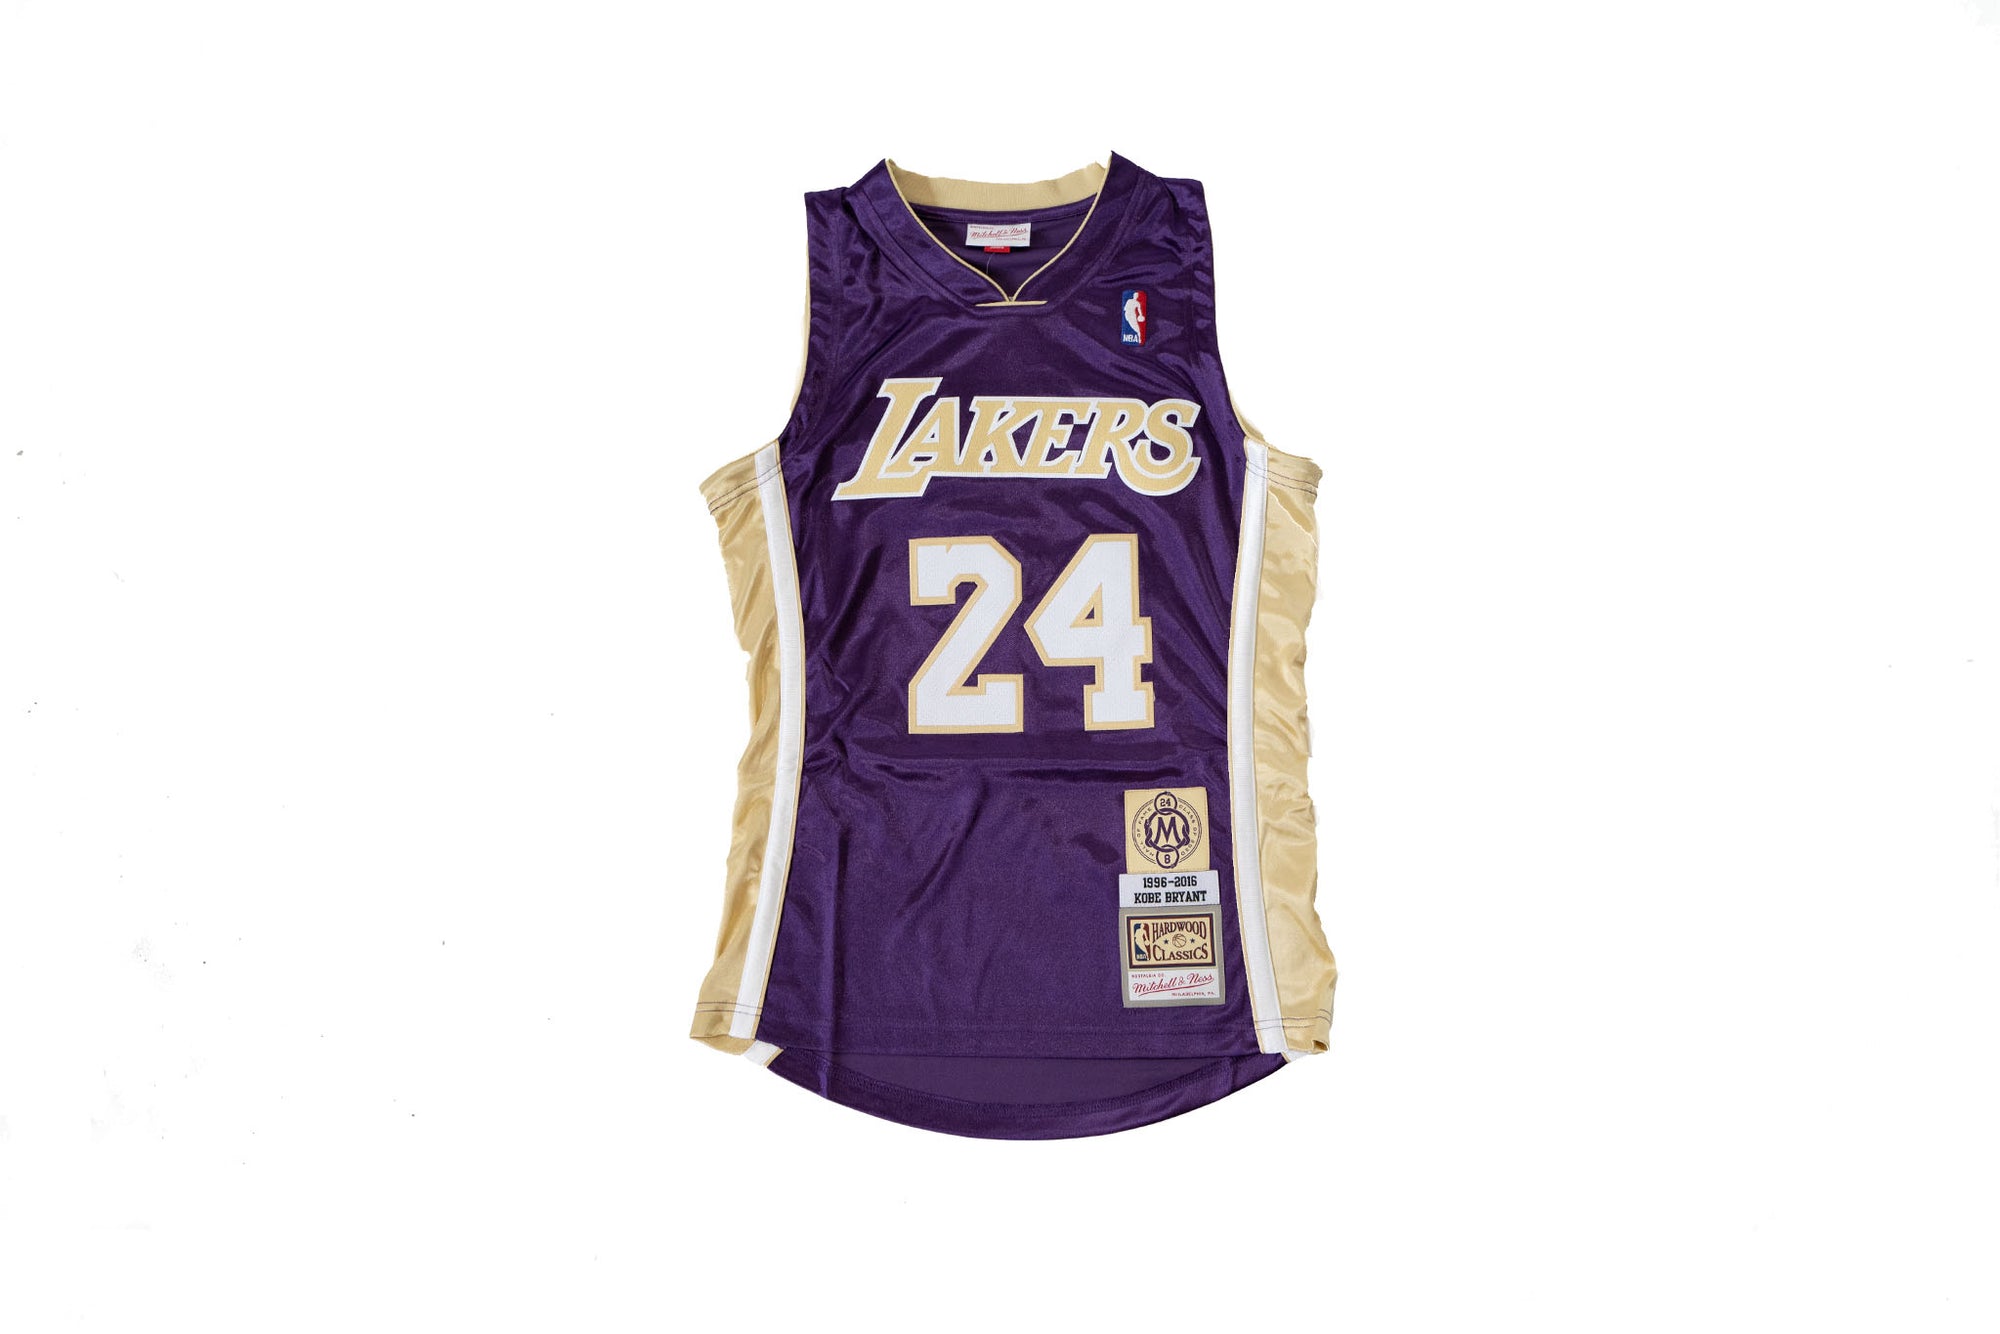 Kobe Bryant YOUTH Los Angeles Lakers Jersey Yellow – Classic Authentics